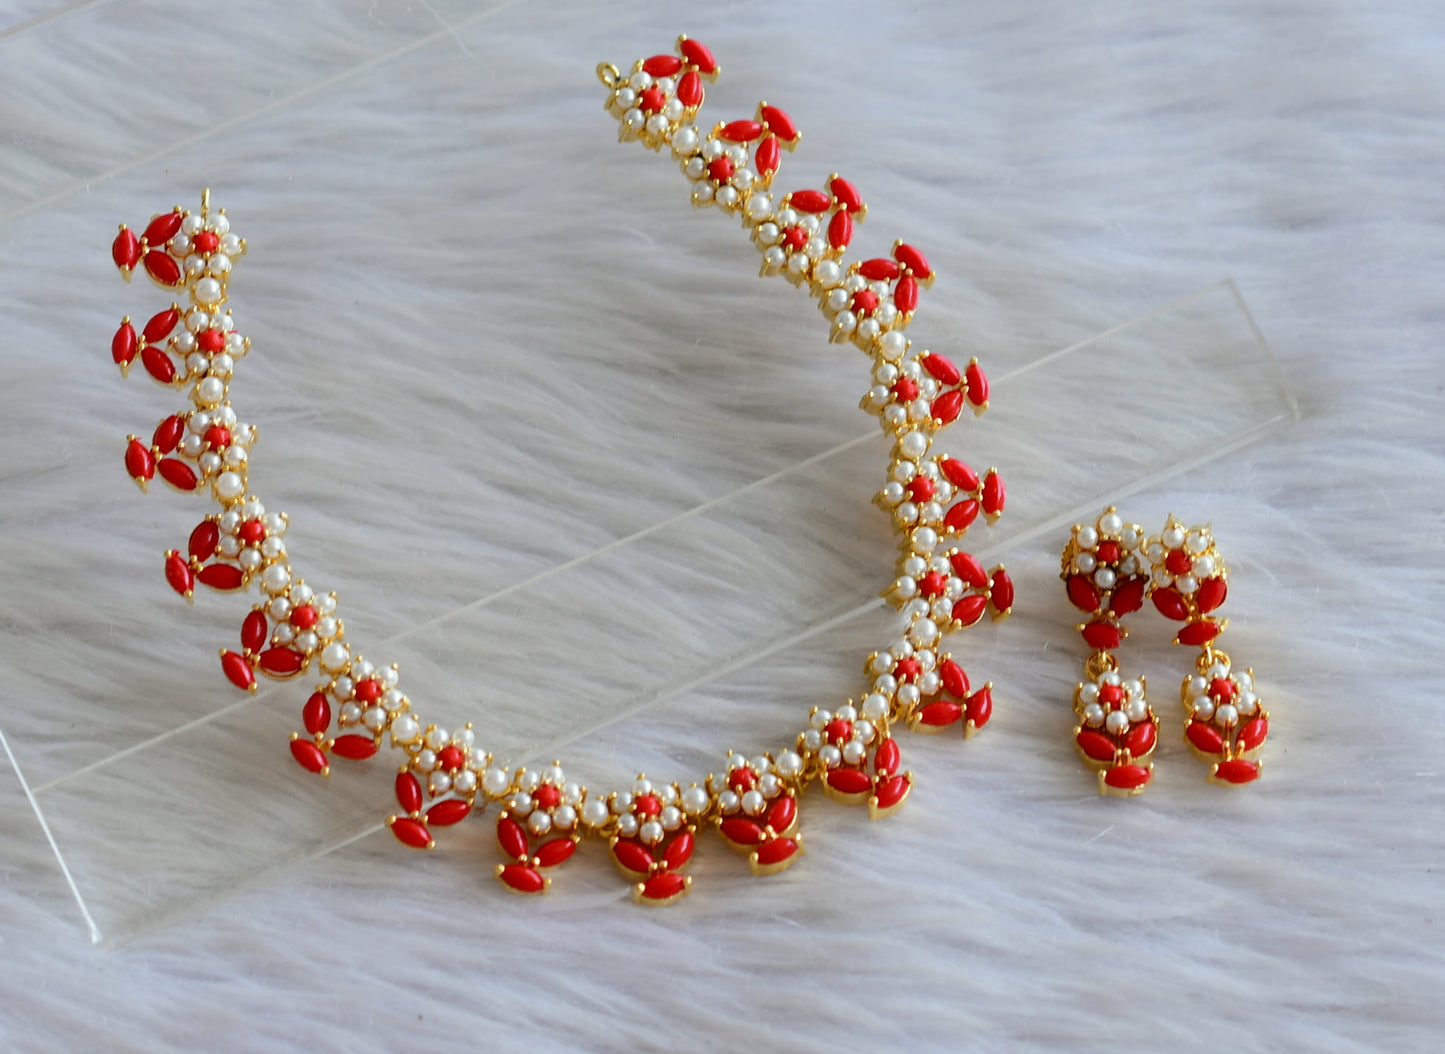 Gold tone coral-pearl stone flower necklace set dj-44887